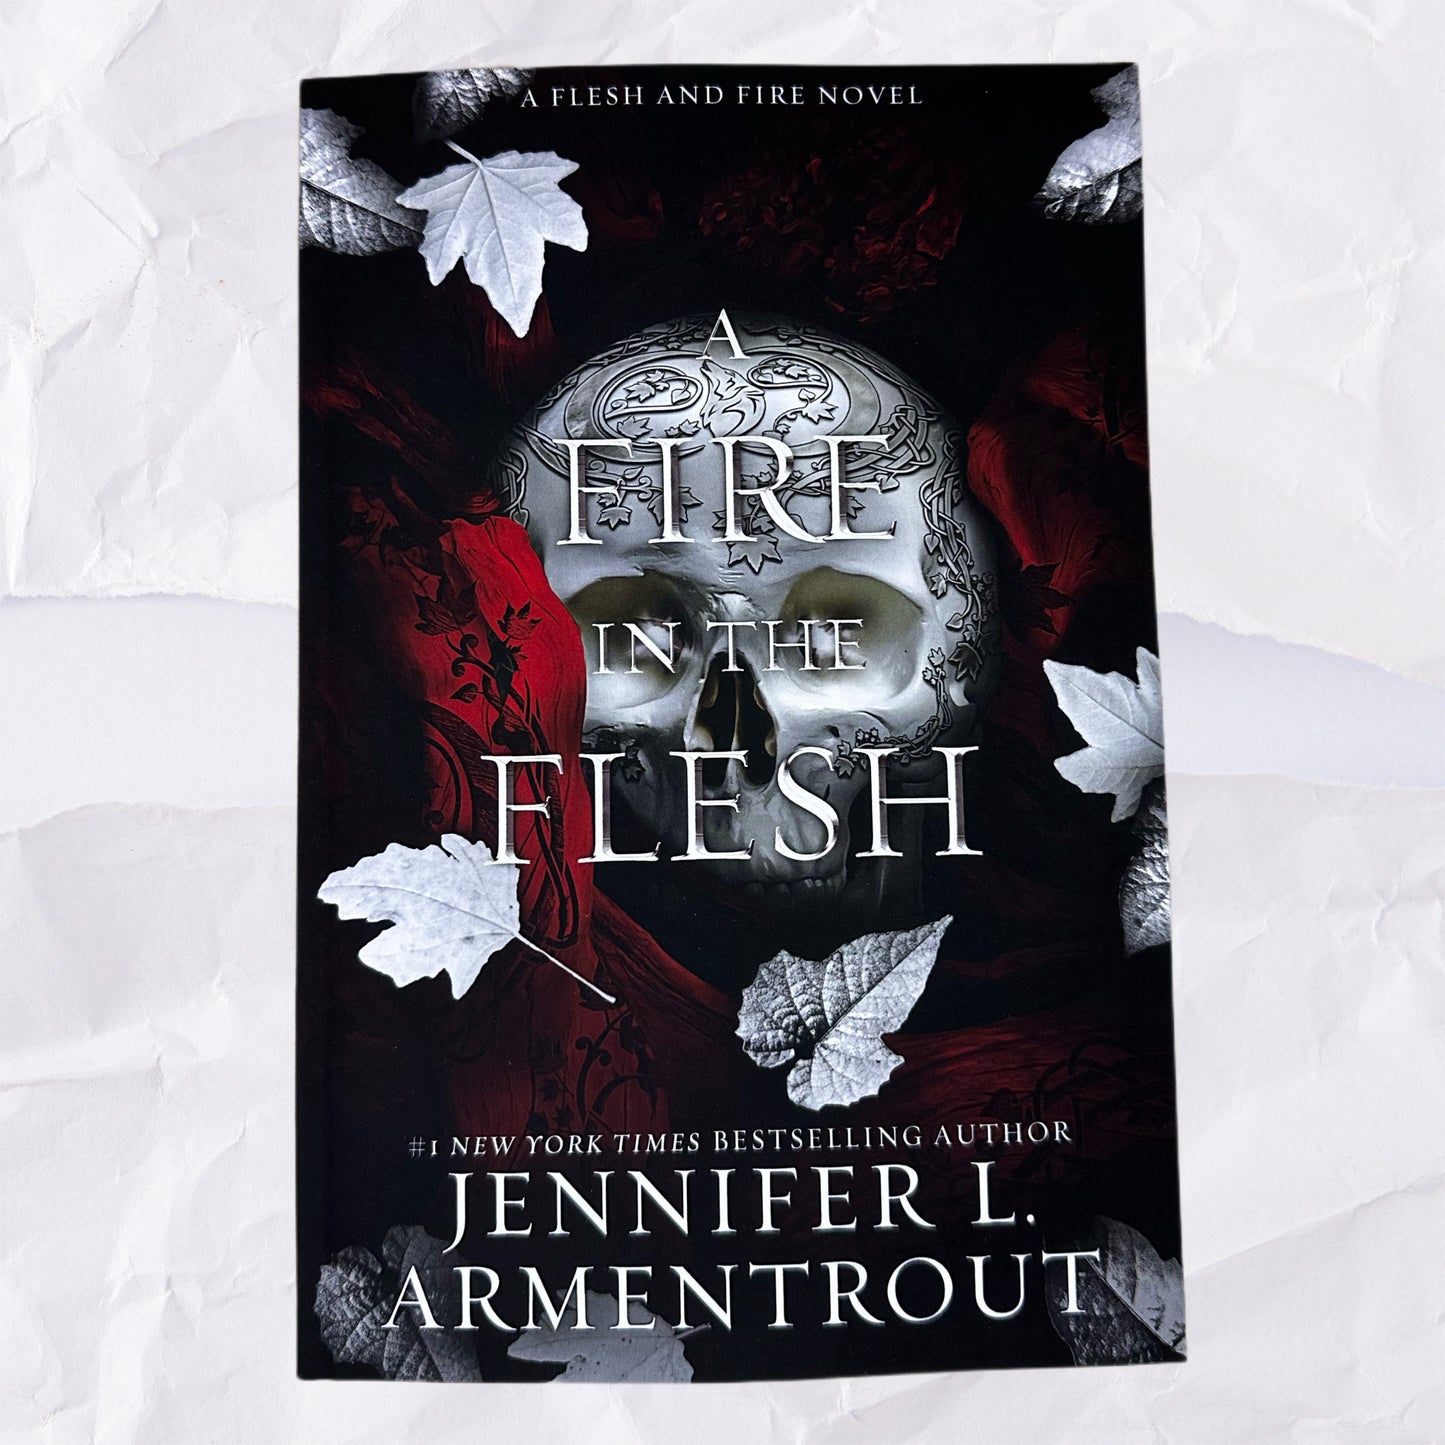 A Fire in the Flesh (Flesh and Fire #3) by Jennifer L. Armentrout